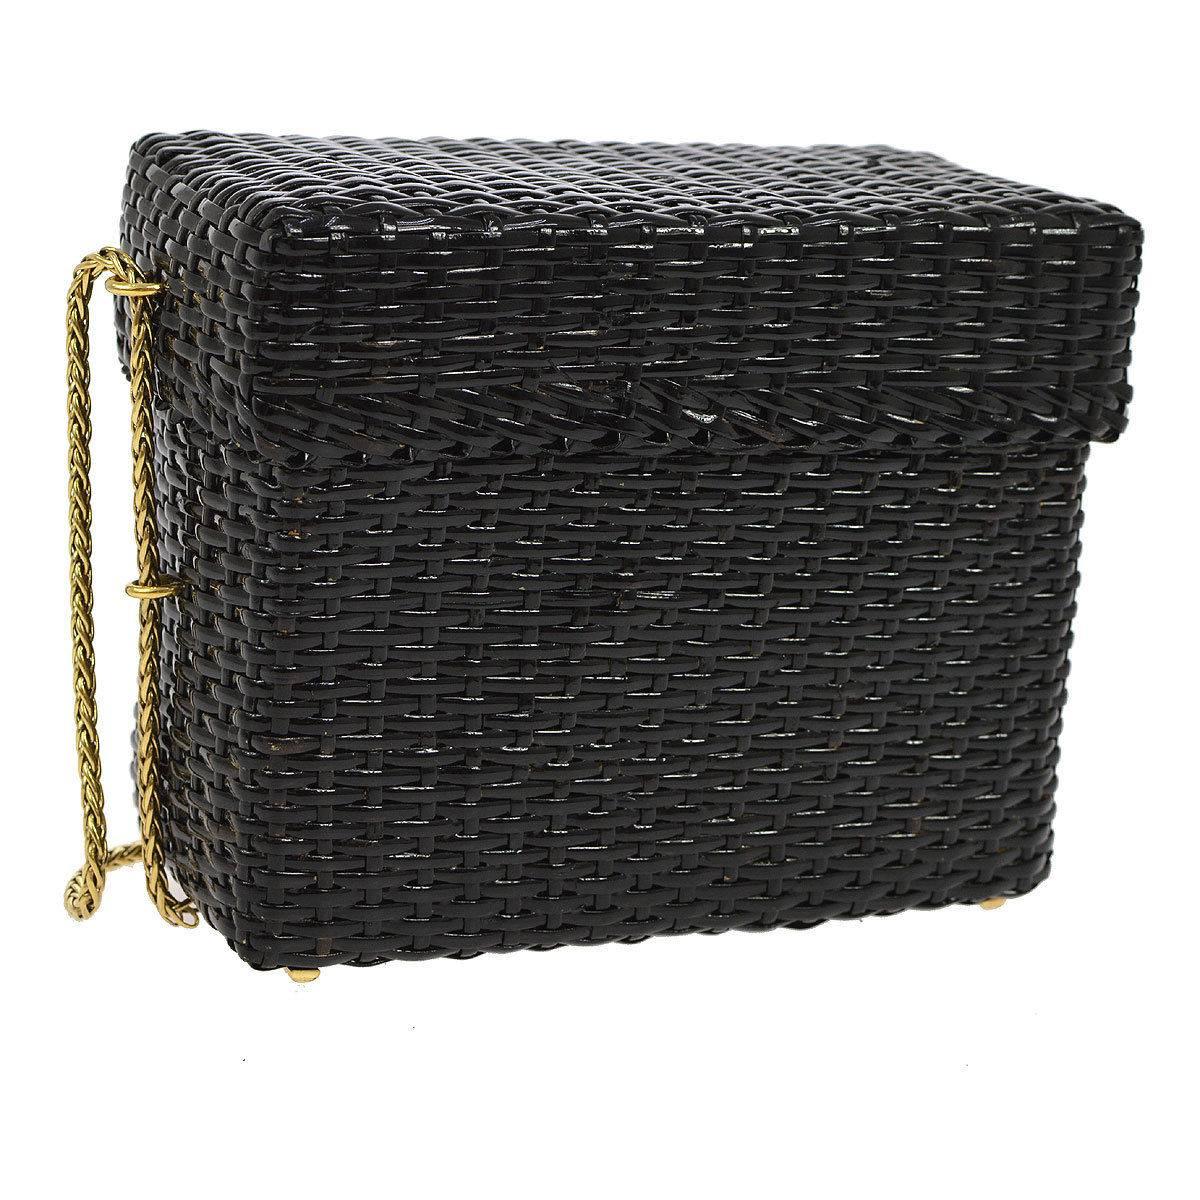 Chanel Rare Black Wicker Picnic Lunch Box Evening Shoulder Bag

Wicker
Metal
Gold tone hardware
Leather lining
Date code present
Made in Italy
Shoulder strap drop 16"
Measures 7" W x 6" H x 3.25" D 